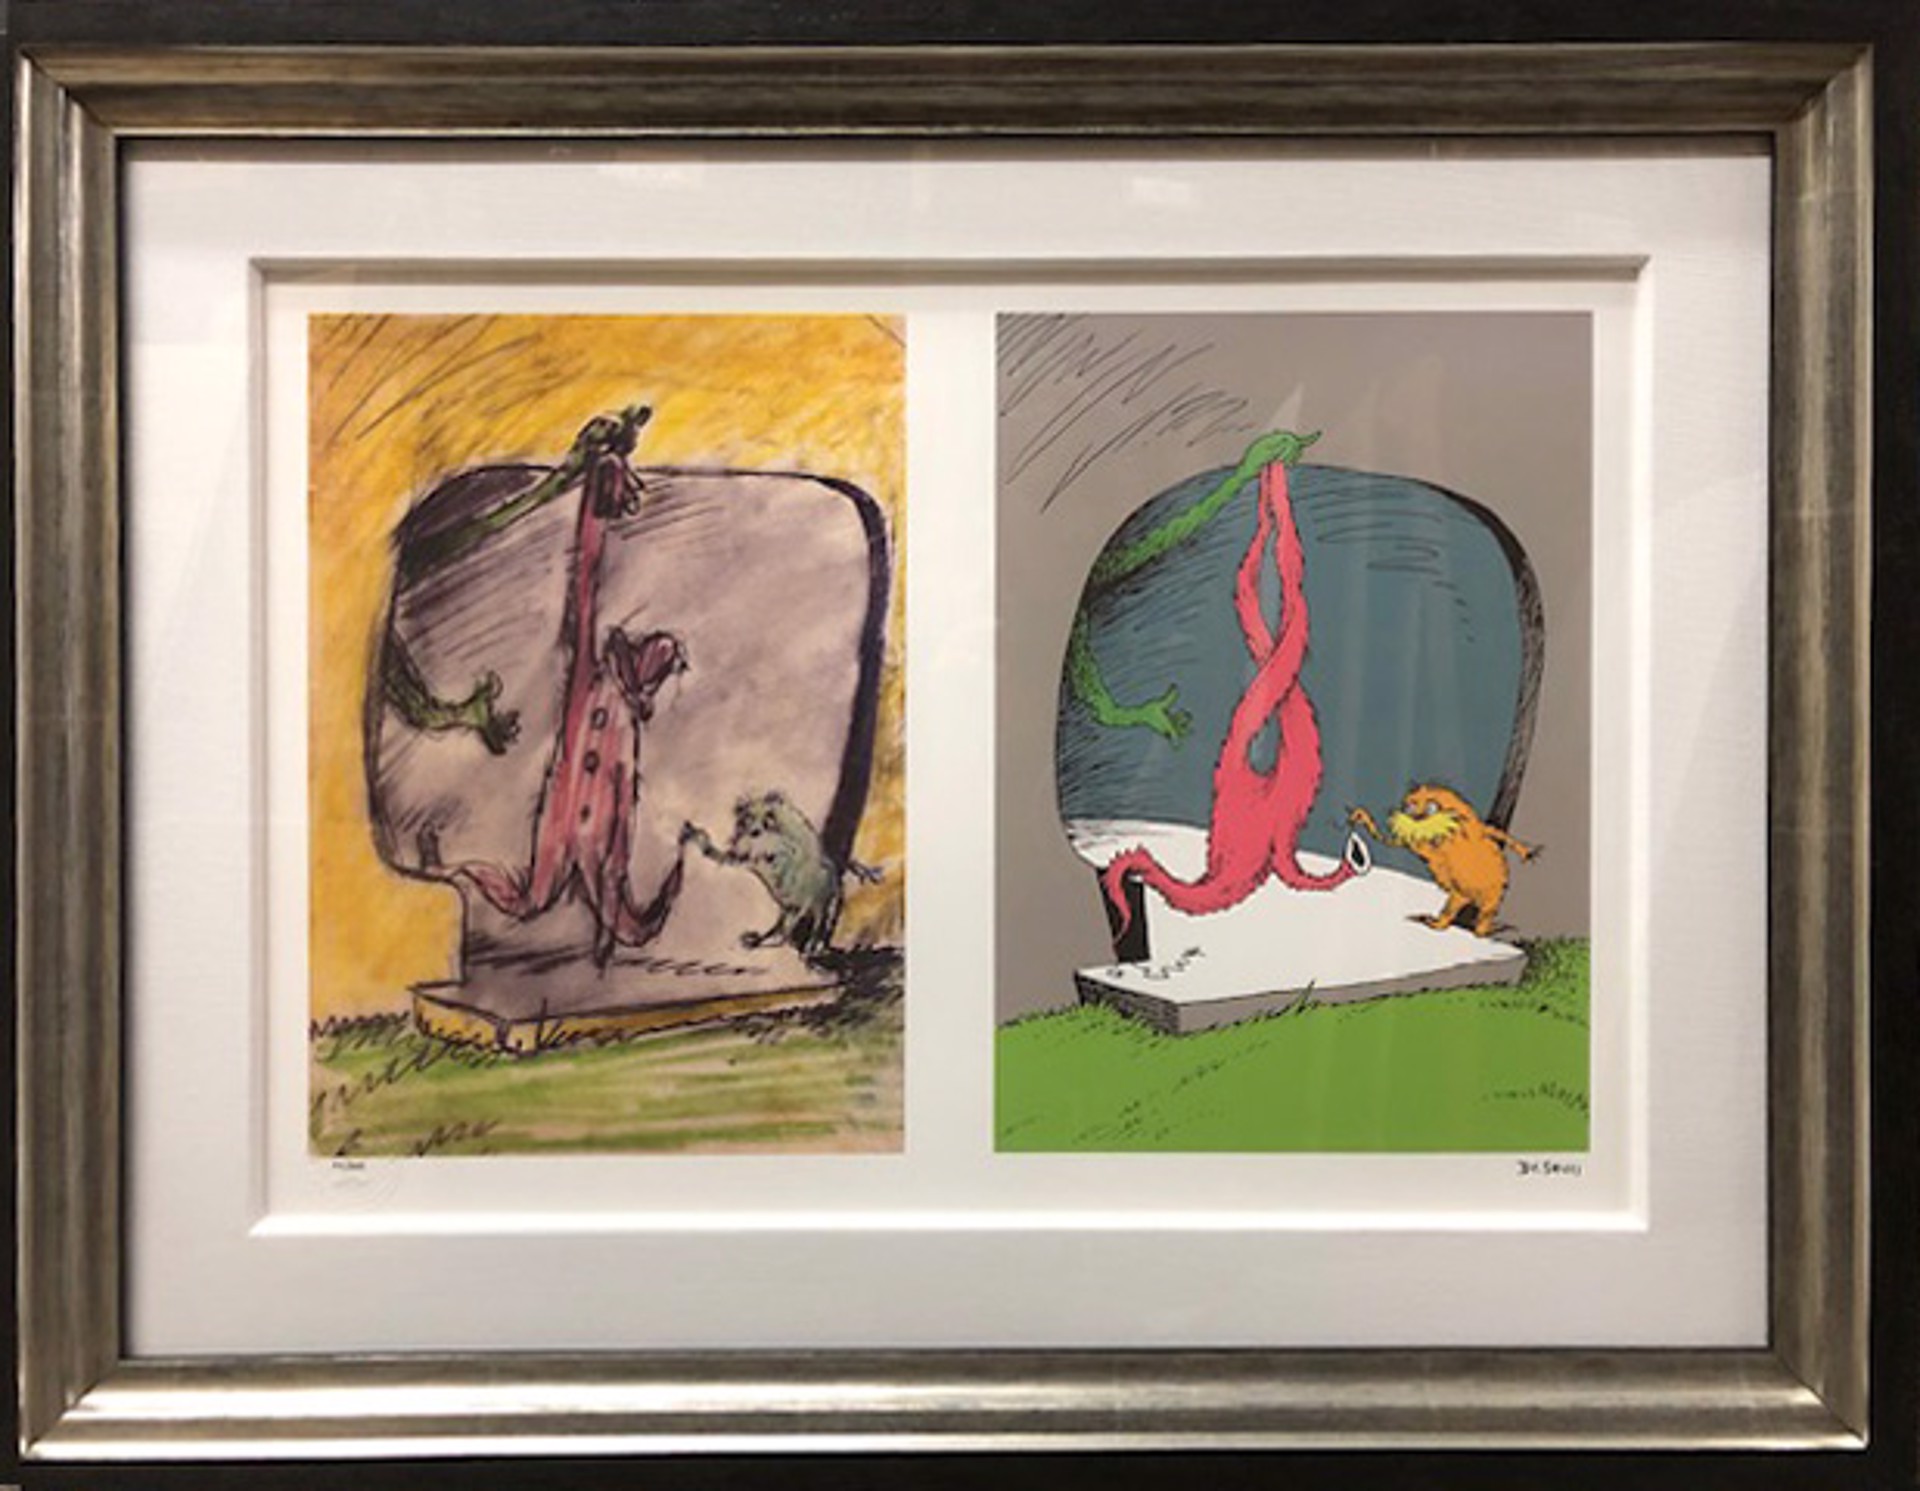 A Thneed's A Fine Something That All People Need! (Diptych) by Dr. Seuss